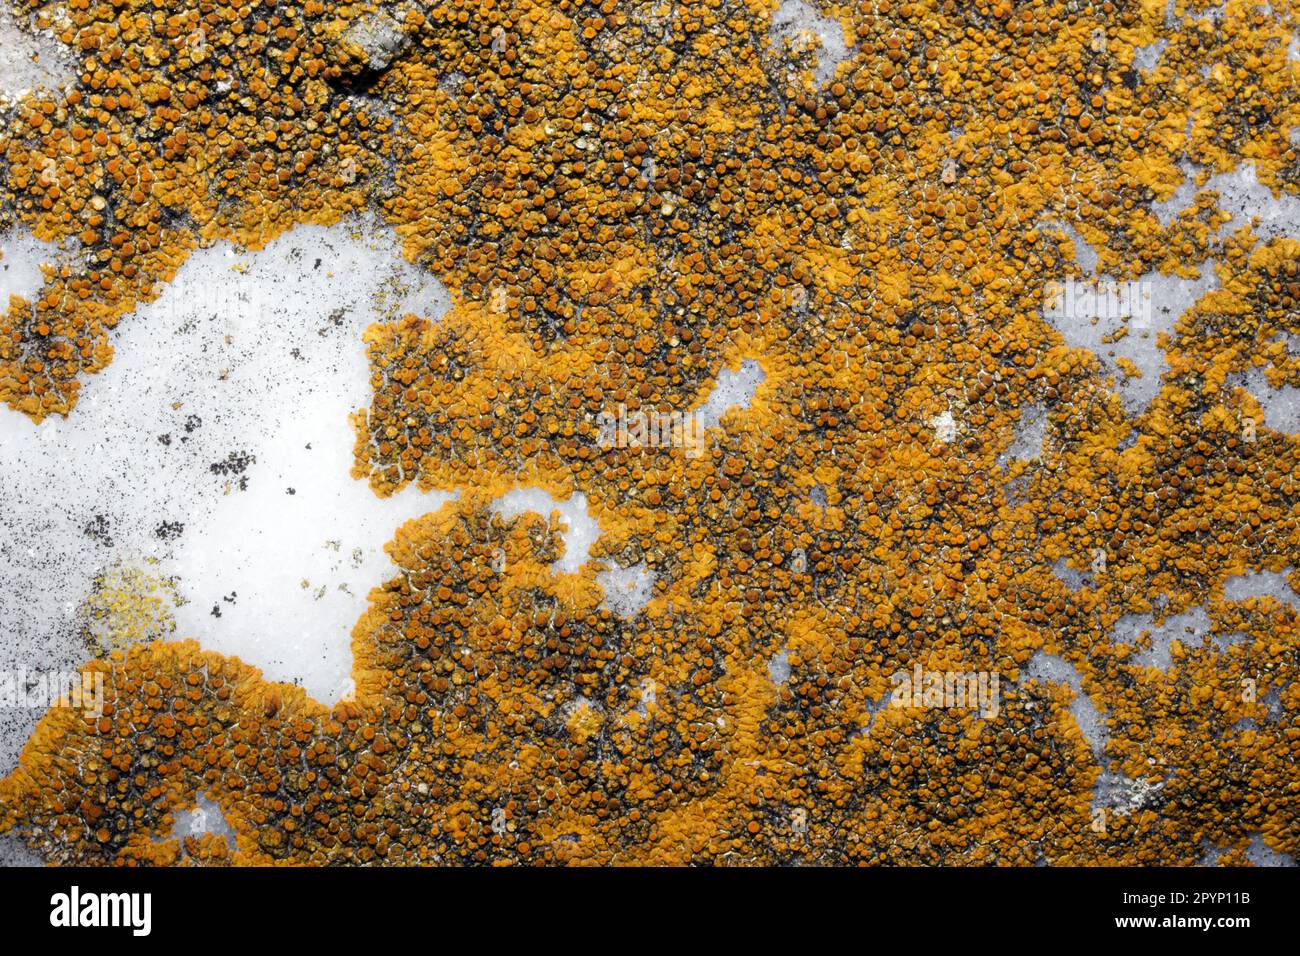 Caloplaca saxicola is bright orange crustose lichen that grows on rock. It has a global distribution. Stock Photo